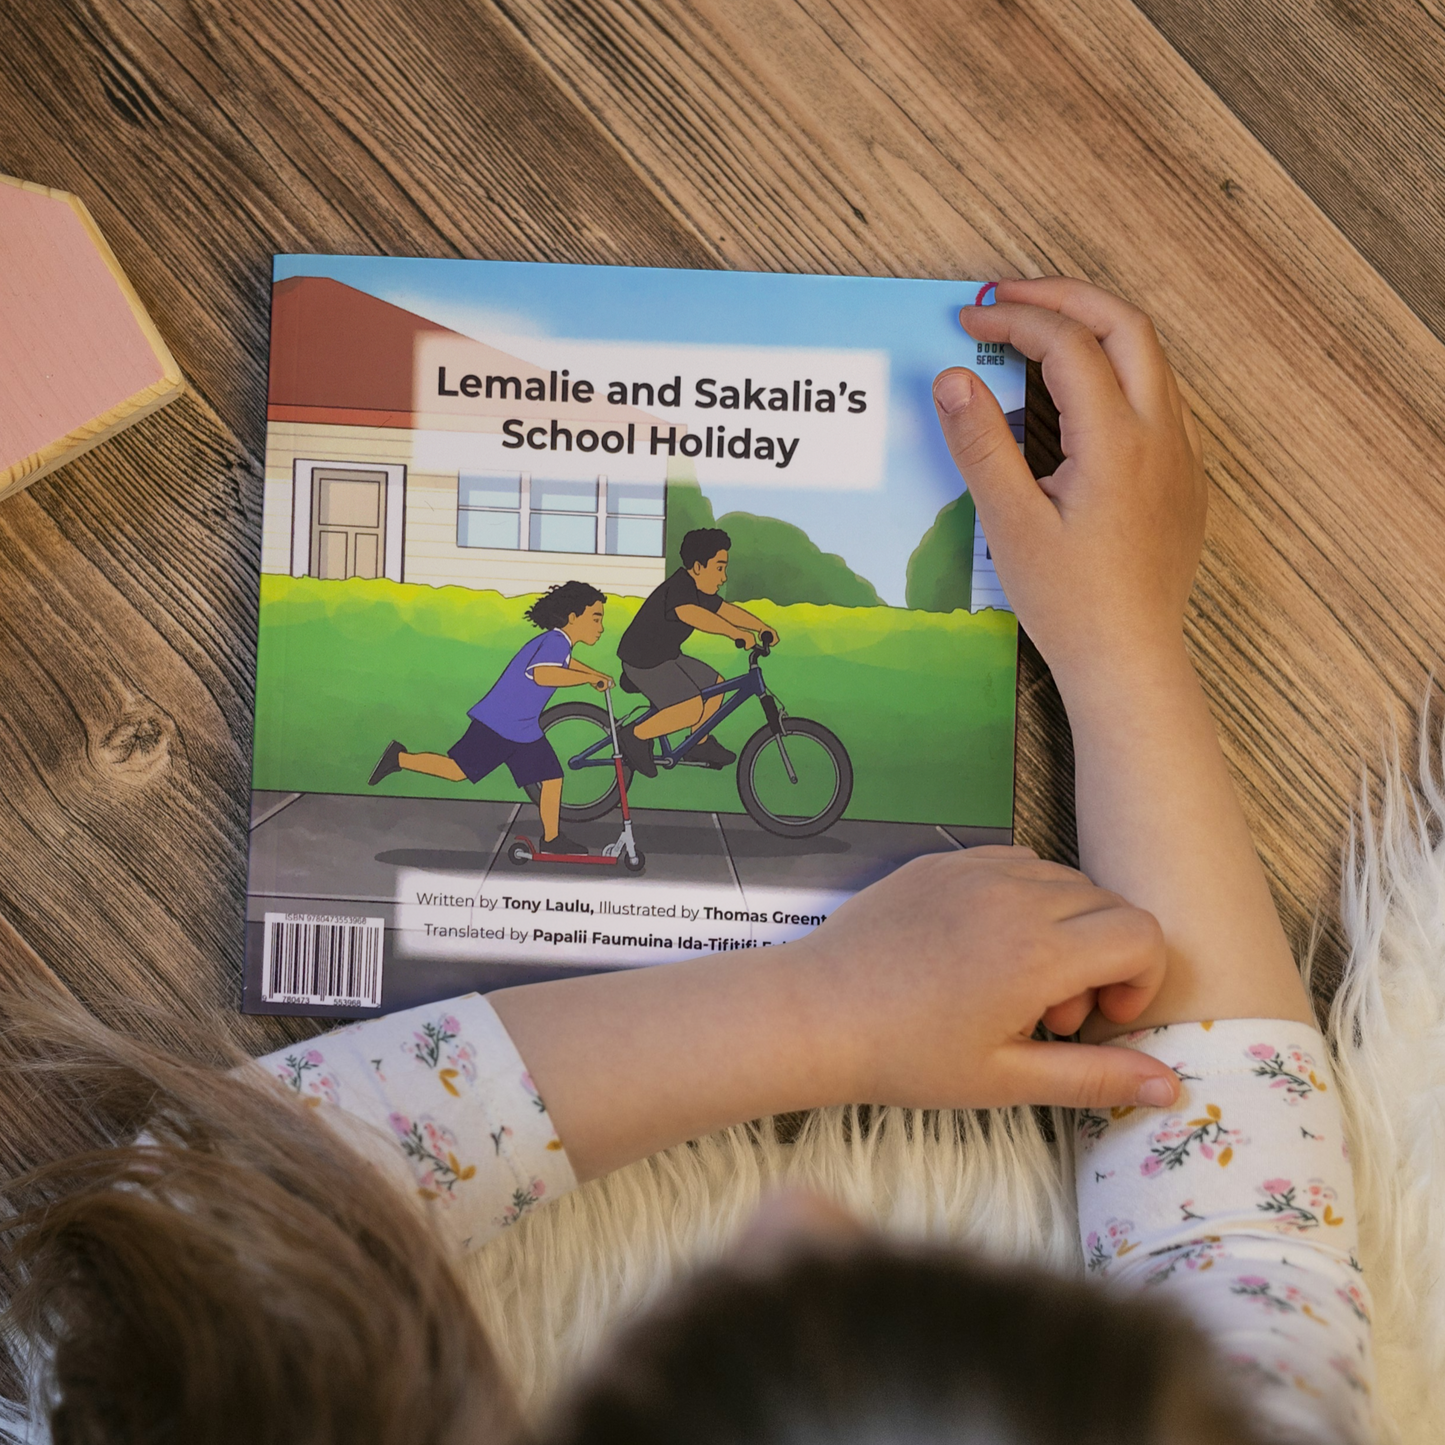 A young child reading a bilingual Samoan children's book titled "Lemalie and Sakalia’s School Holiday". The book is an illustration of two young boys riding their bikes during their school holiday.